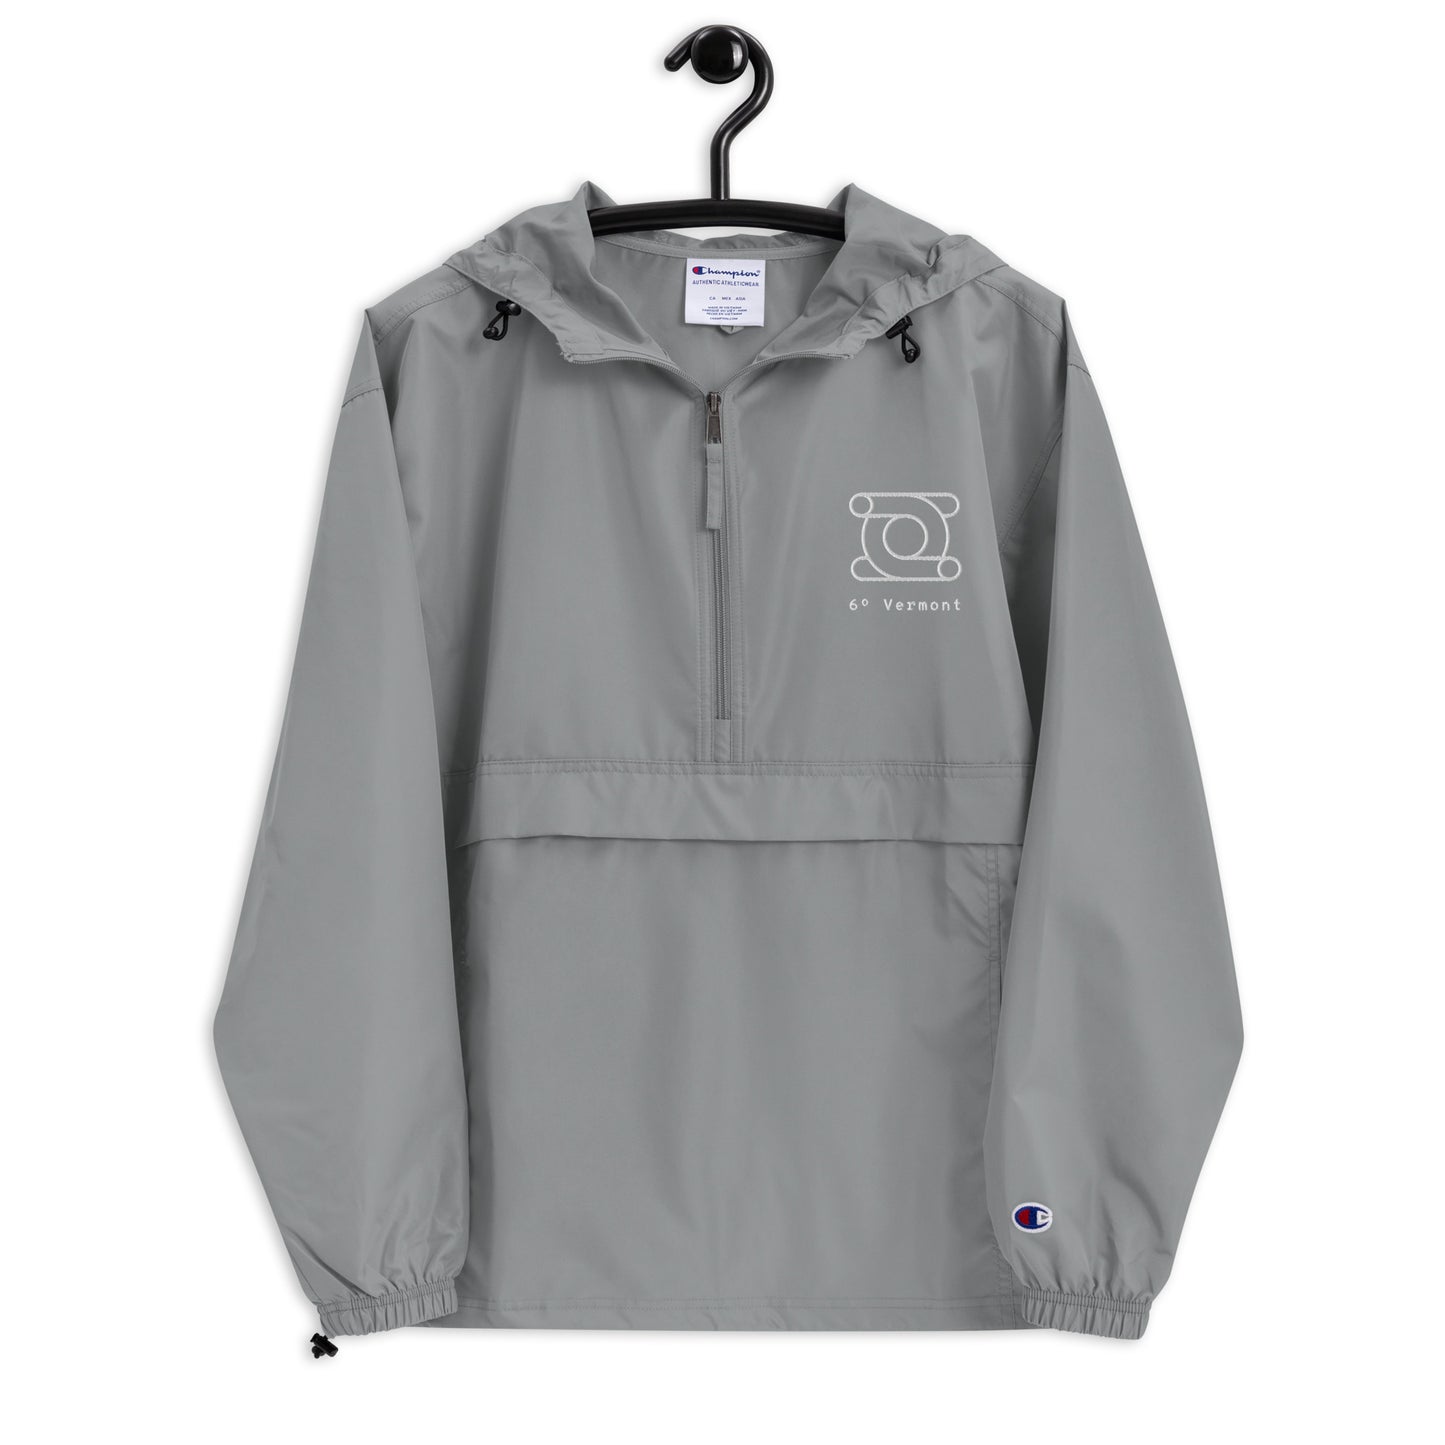 6° Vermont Embroidered Champion Packable Jacket